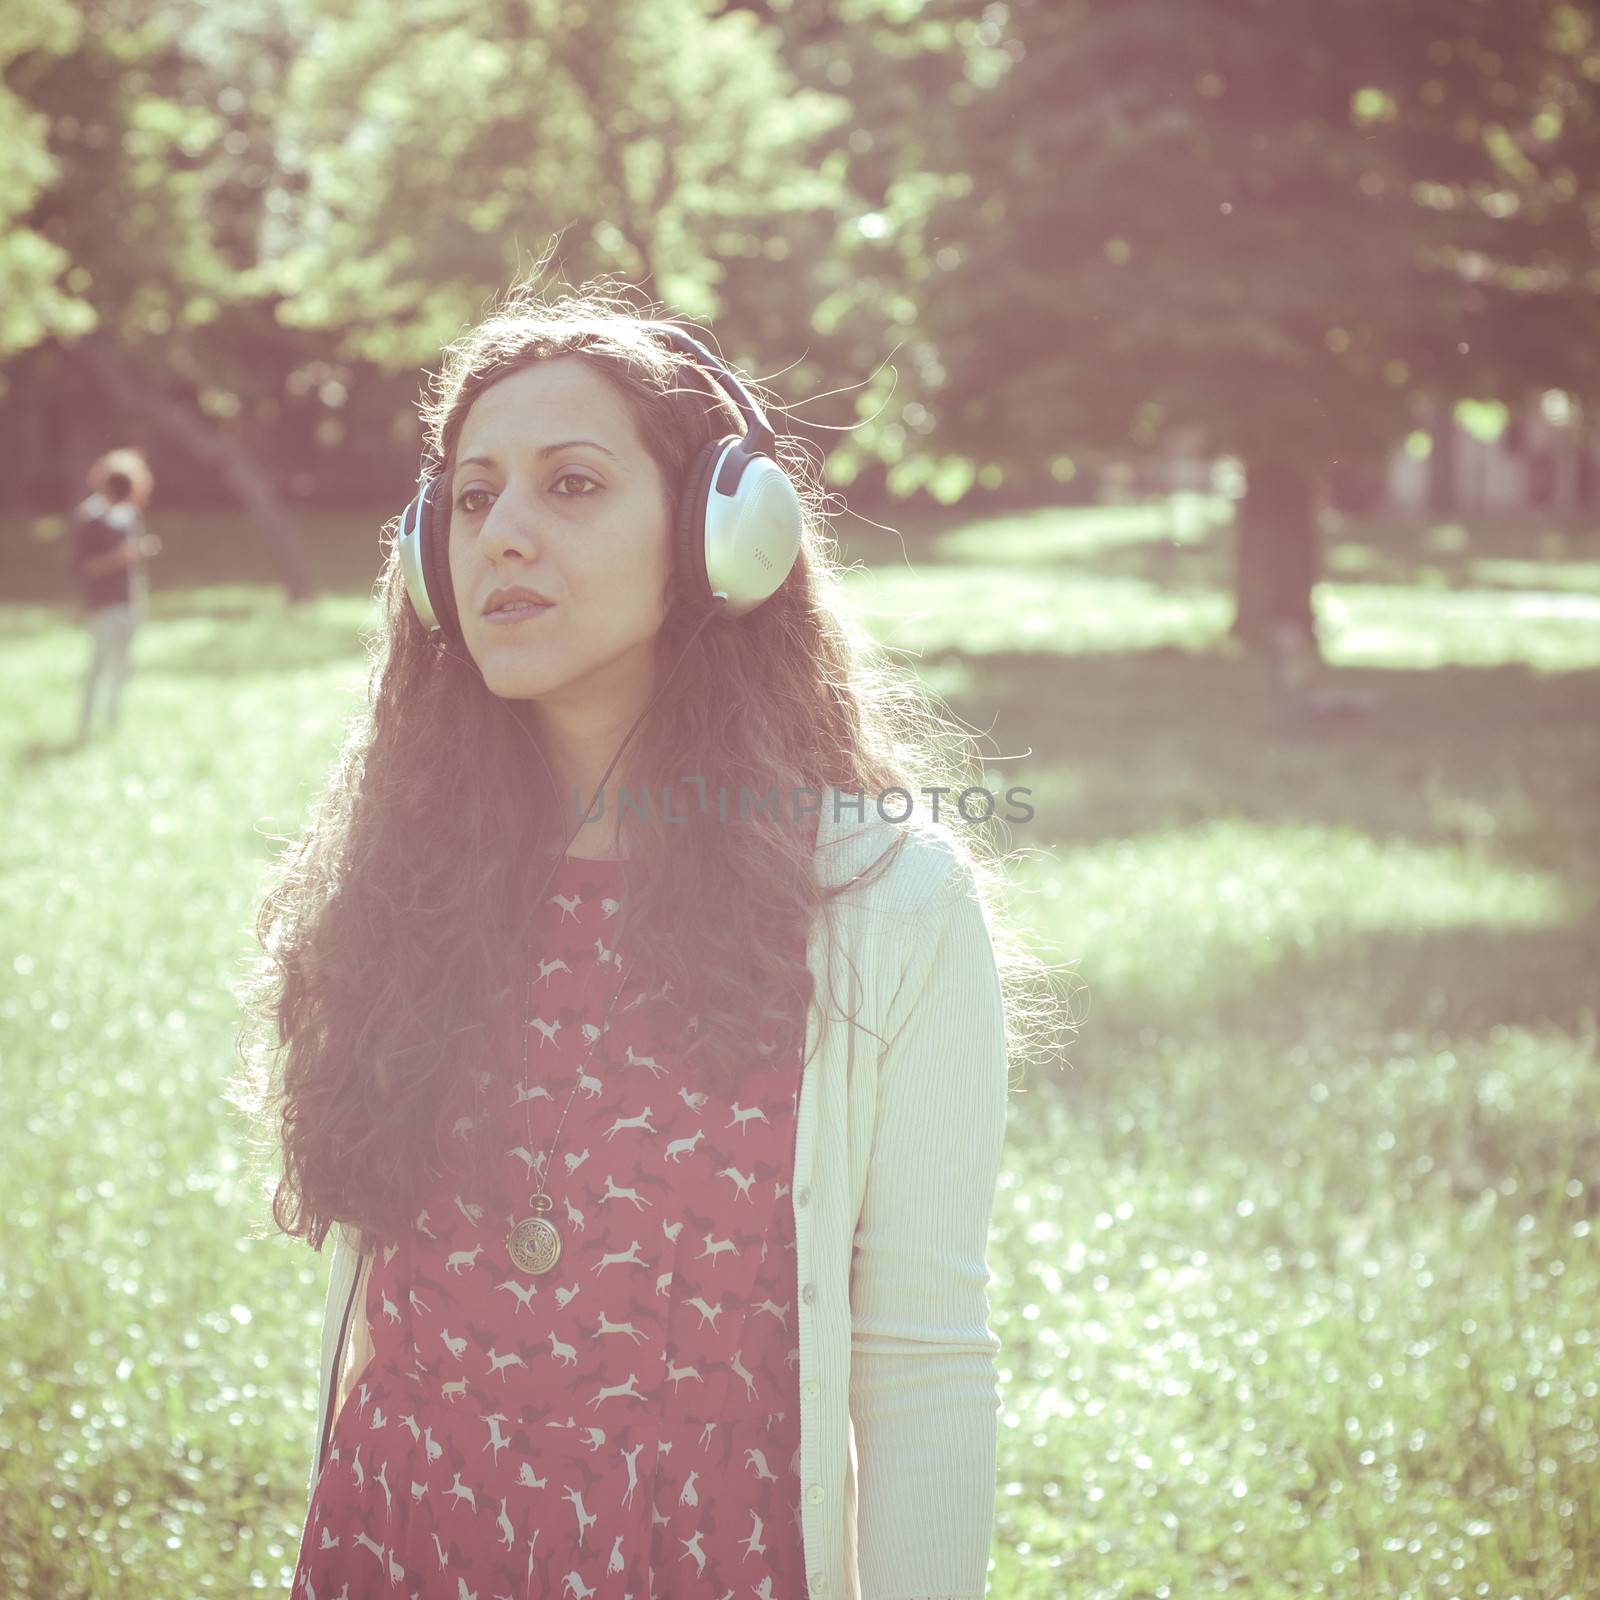 vintage hipster eastern woman with headphones by peus